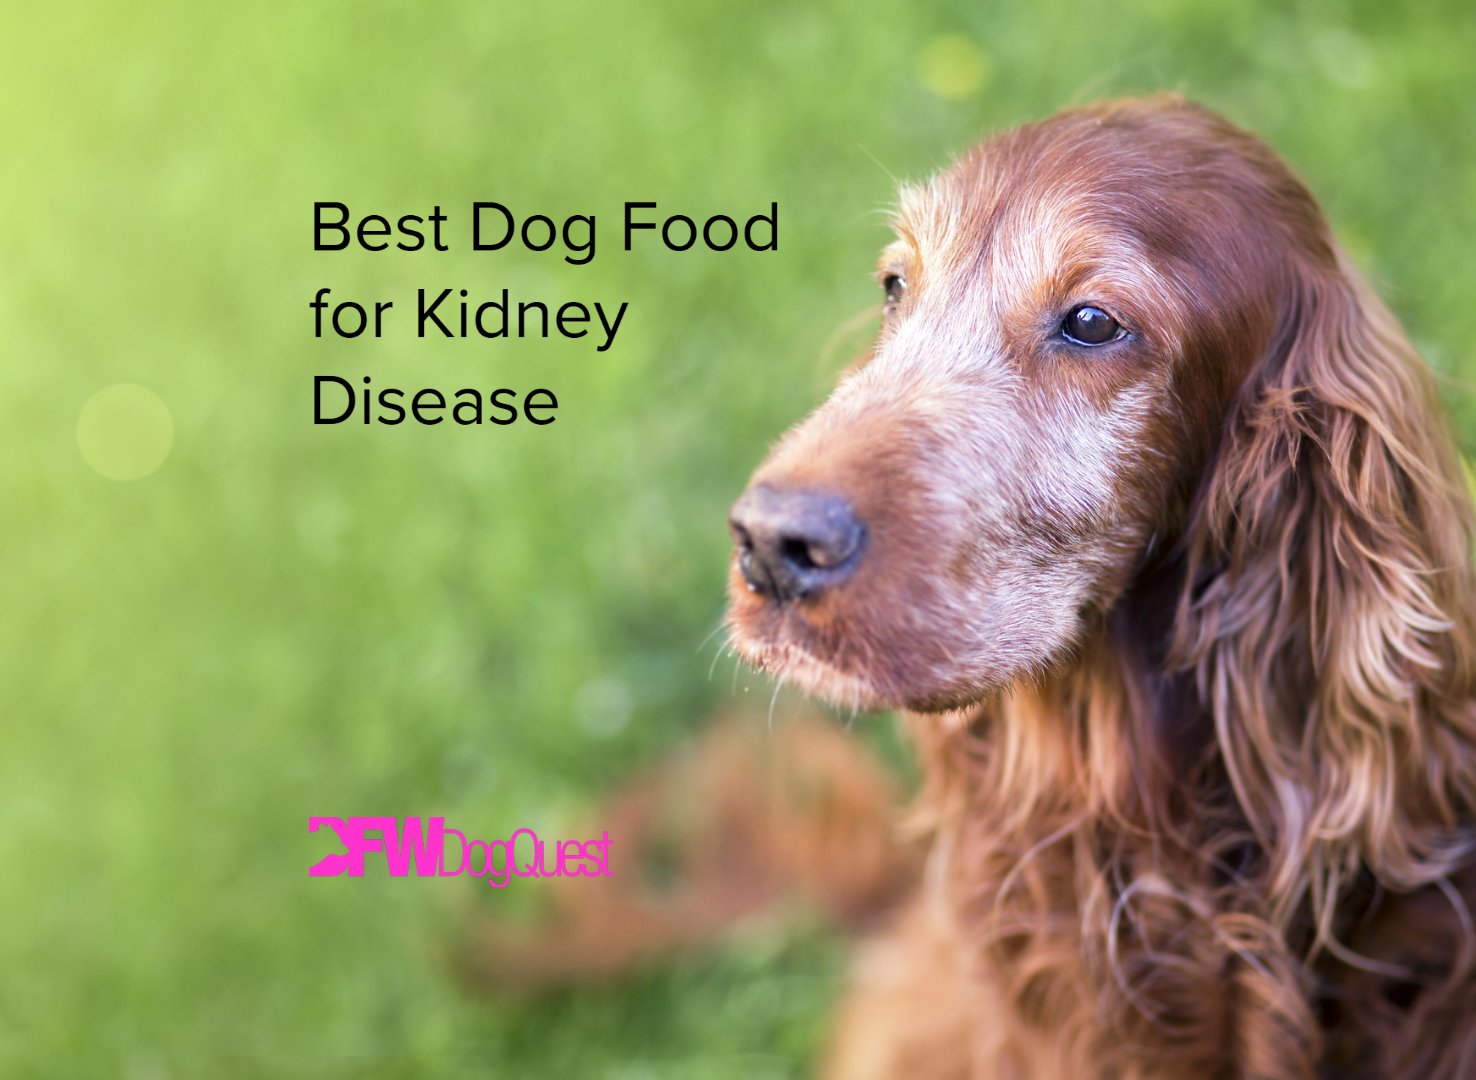 homemade dog food for dogs with kidney disease